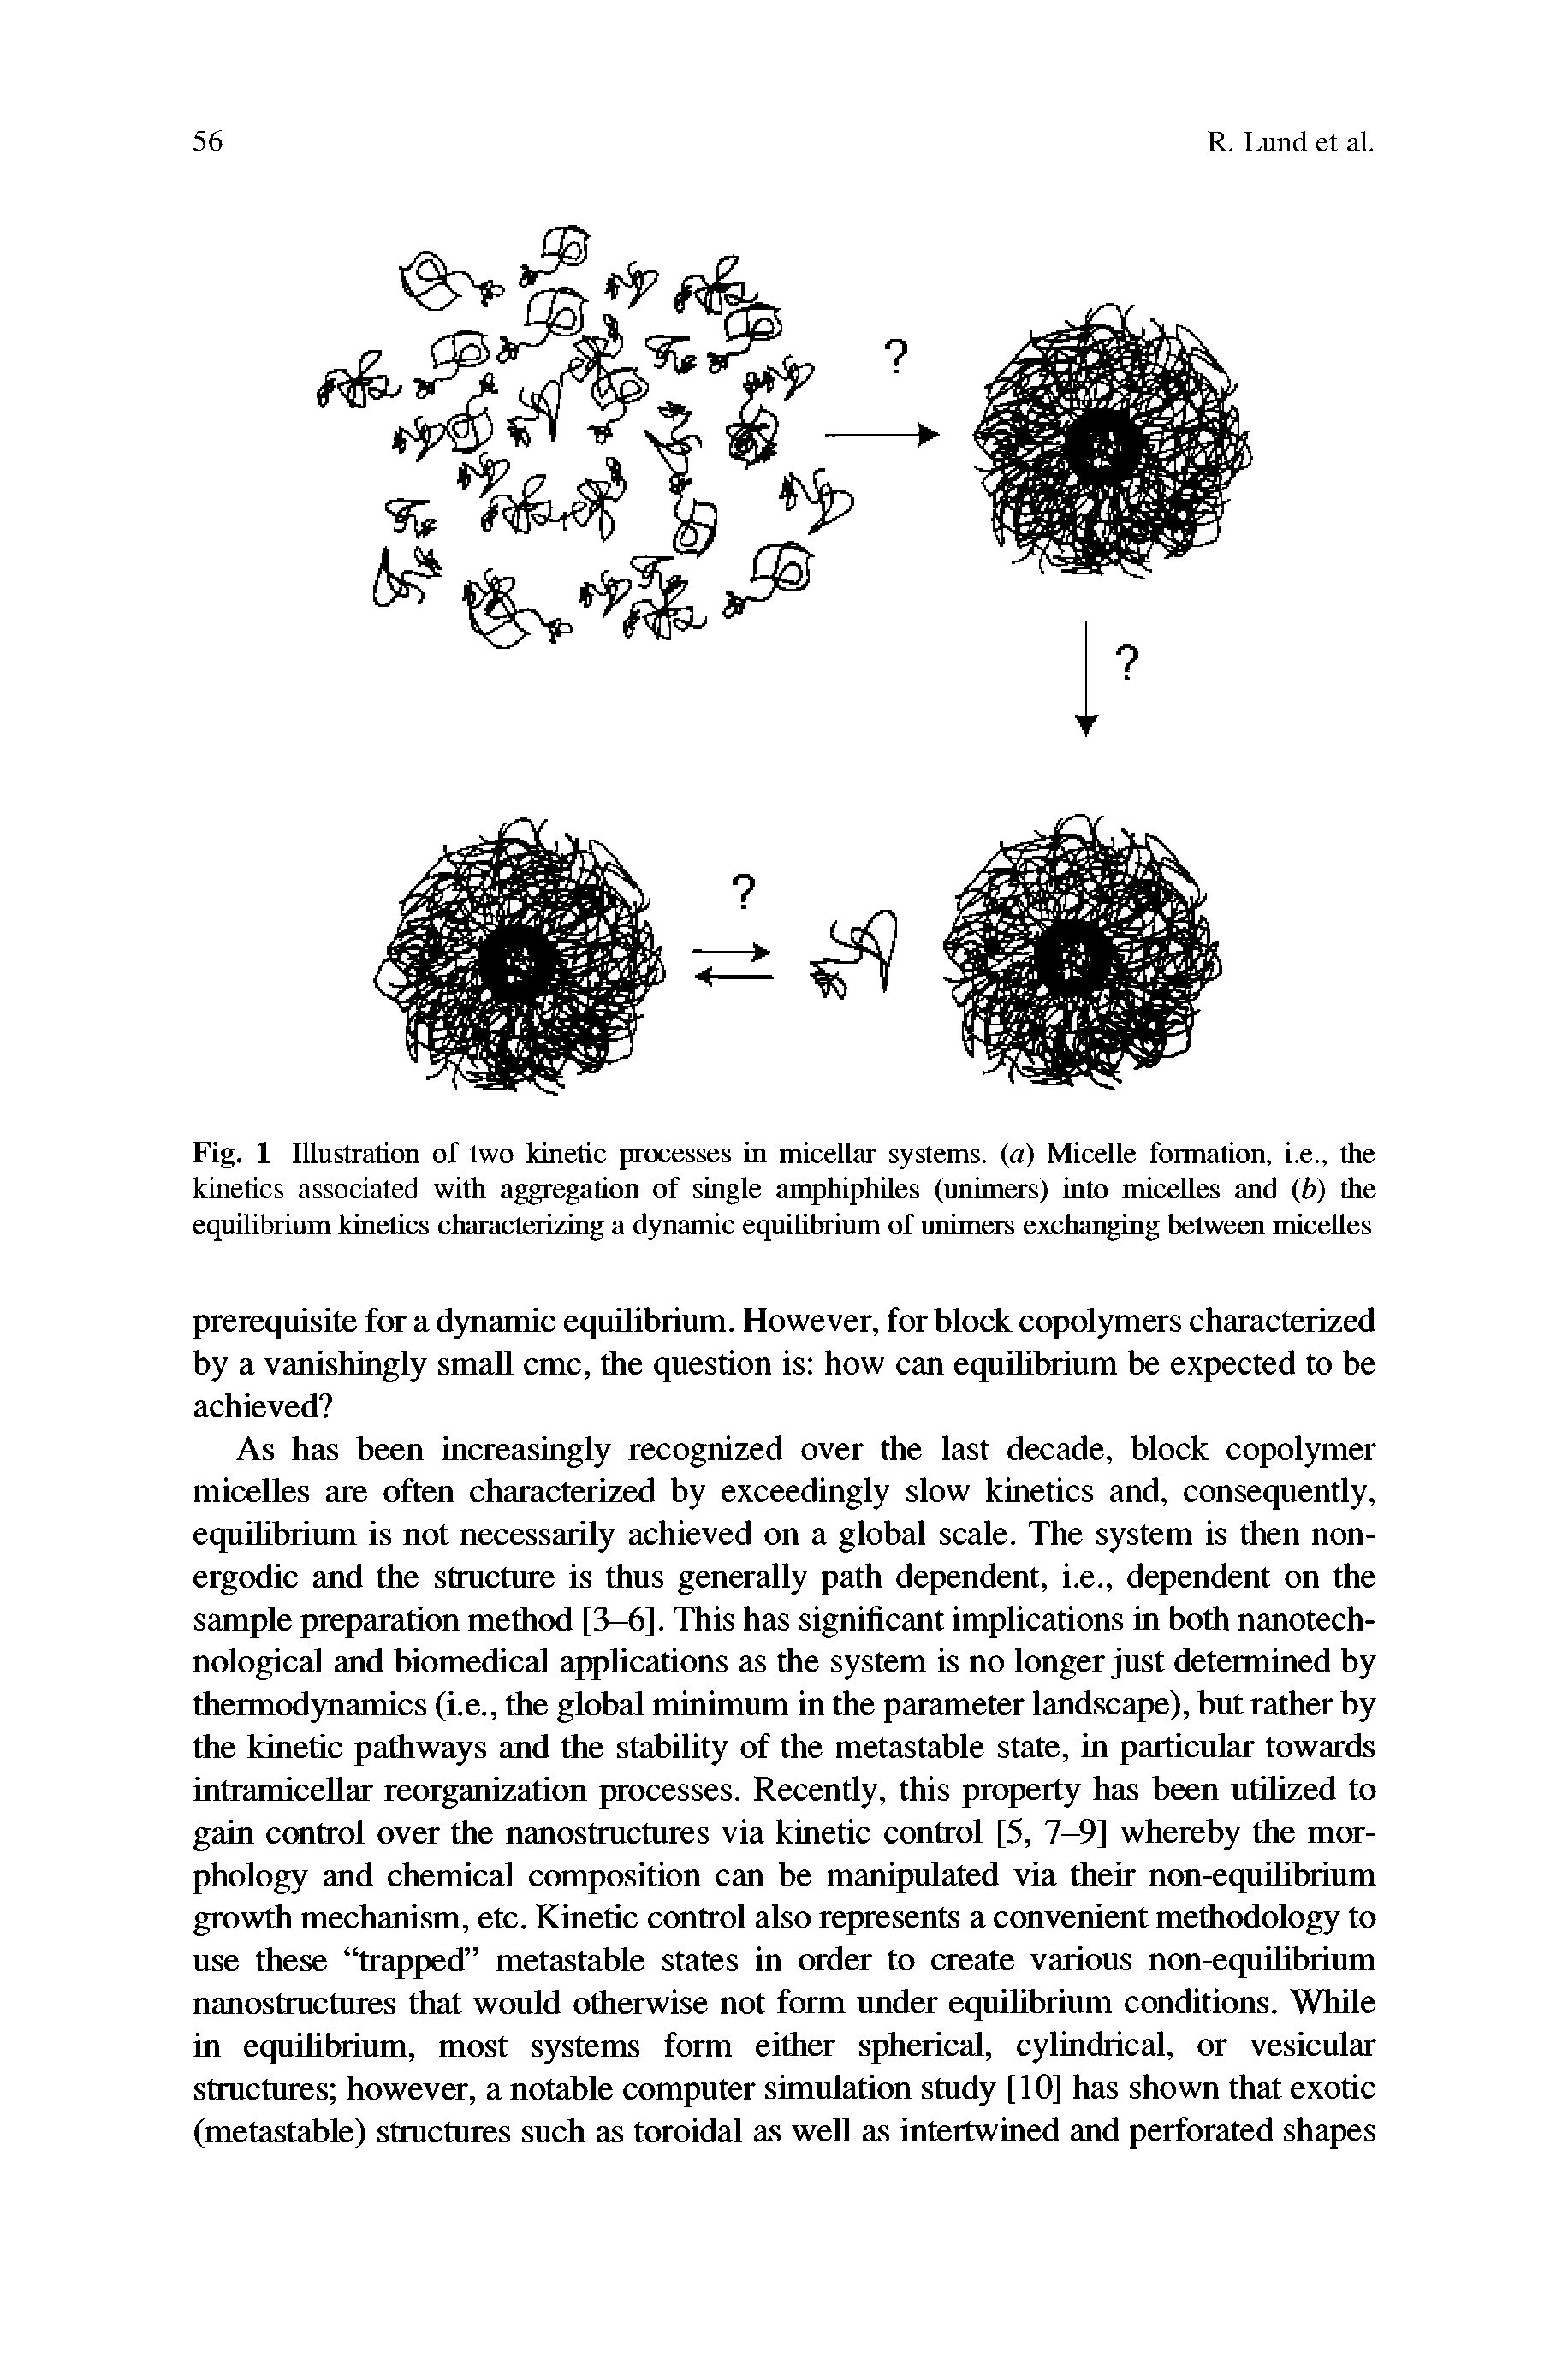 Fig. 1 Illustration of two kinetic processes in micellar systems, (a) Micelle formation, i.e., the kinetics associated with aggregation of single amphiphiles (unimers) into micelles and (i>) the equilibrium kinetics charactiaizing a dynamic equilibrium of unrmcas exchanging between micelles...